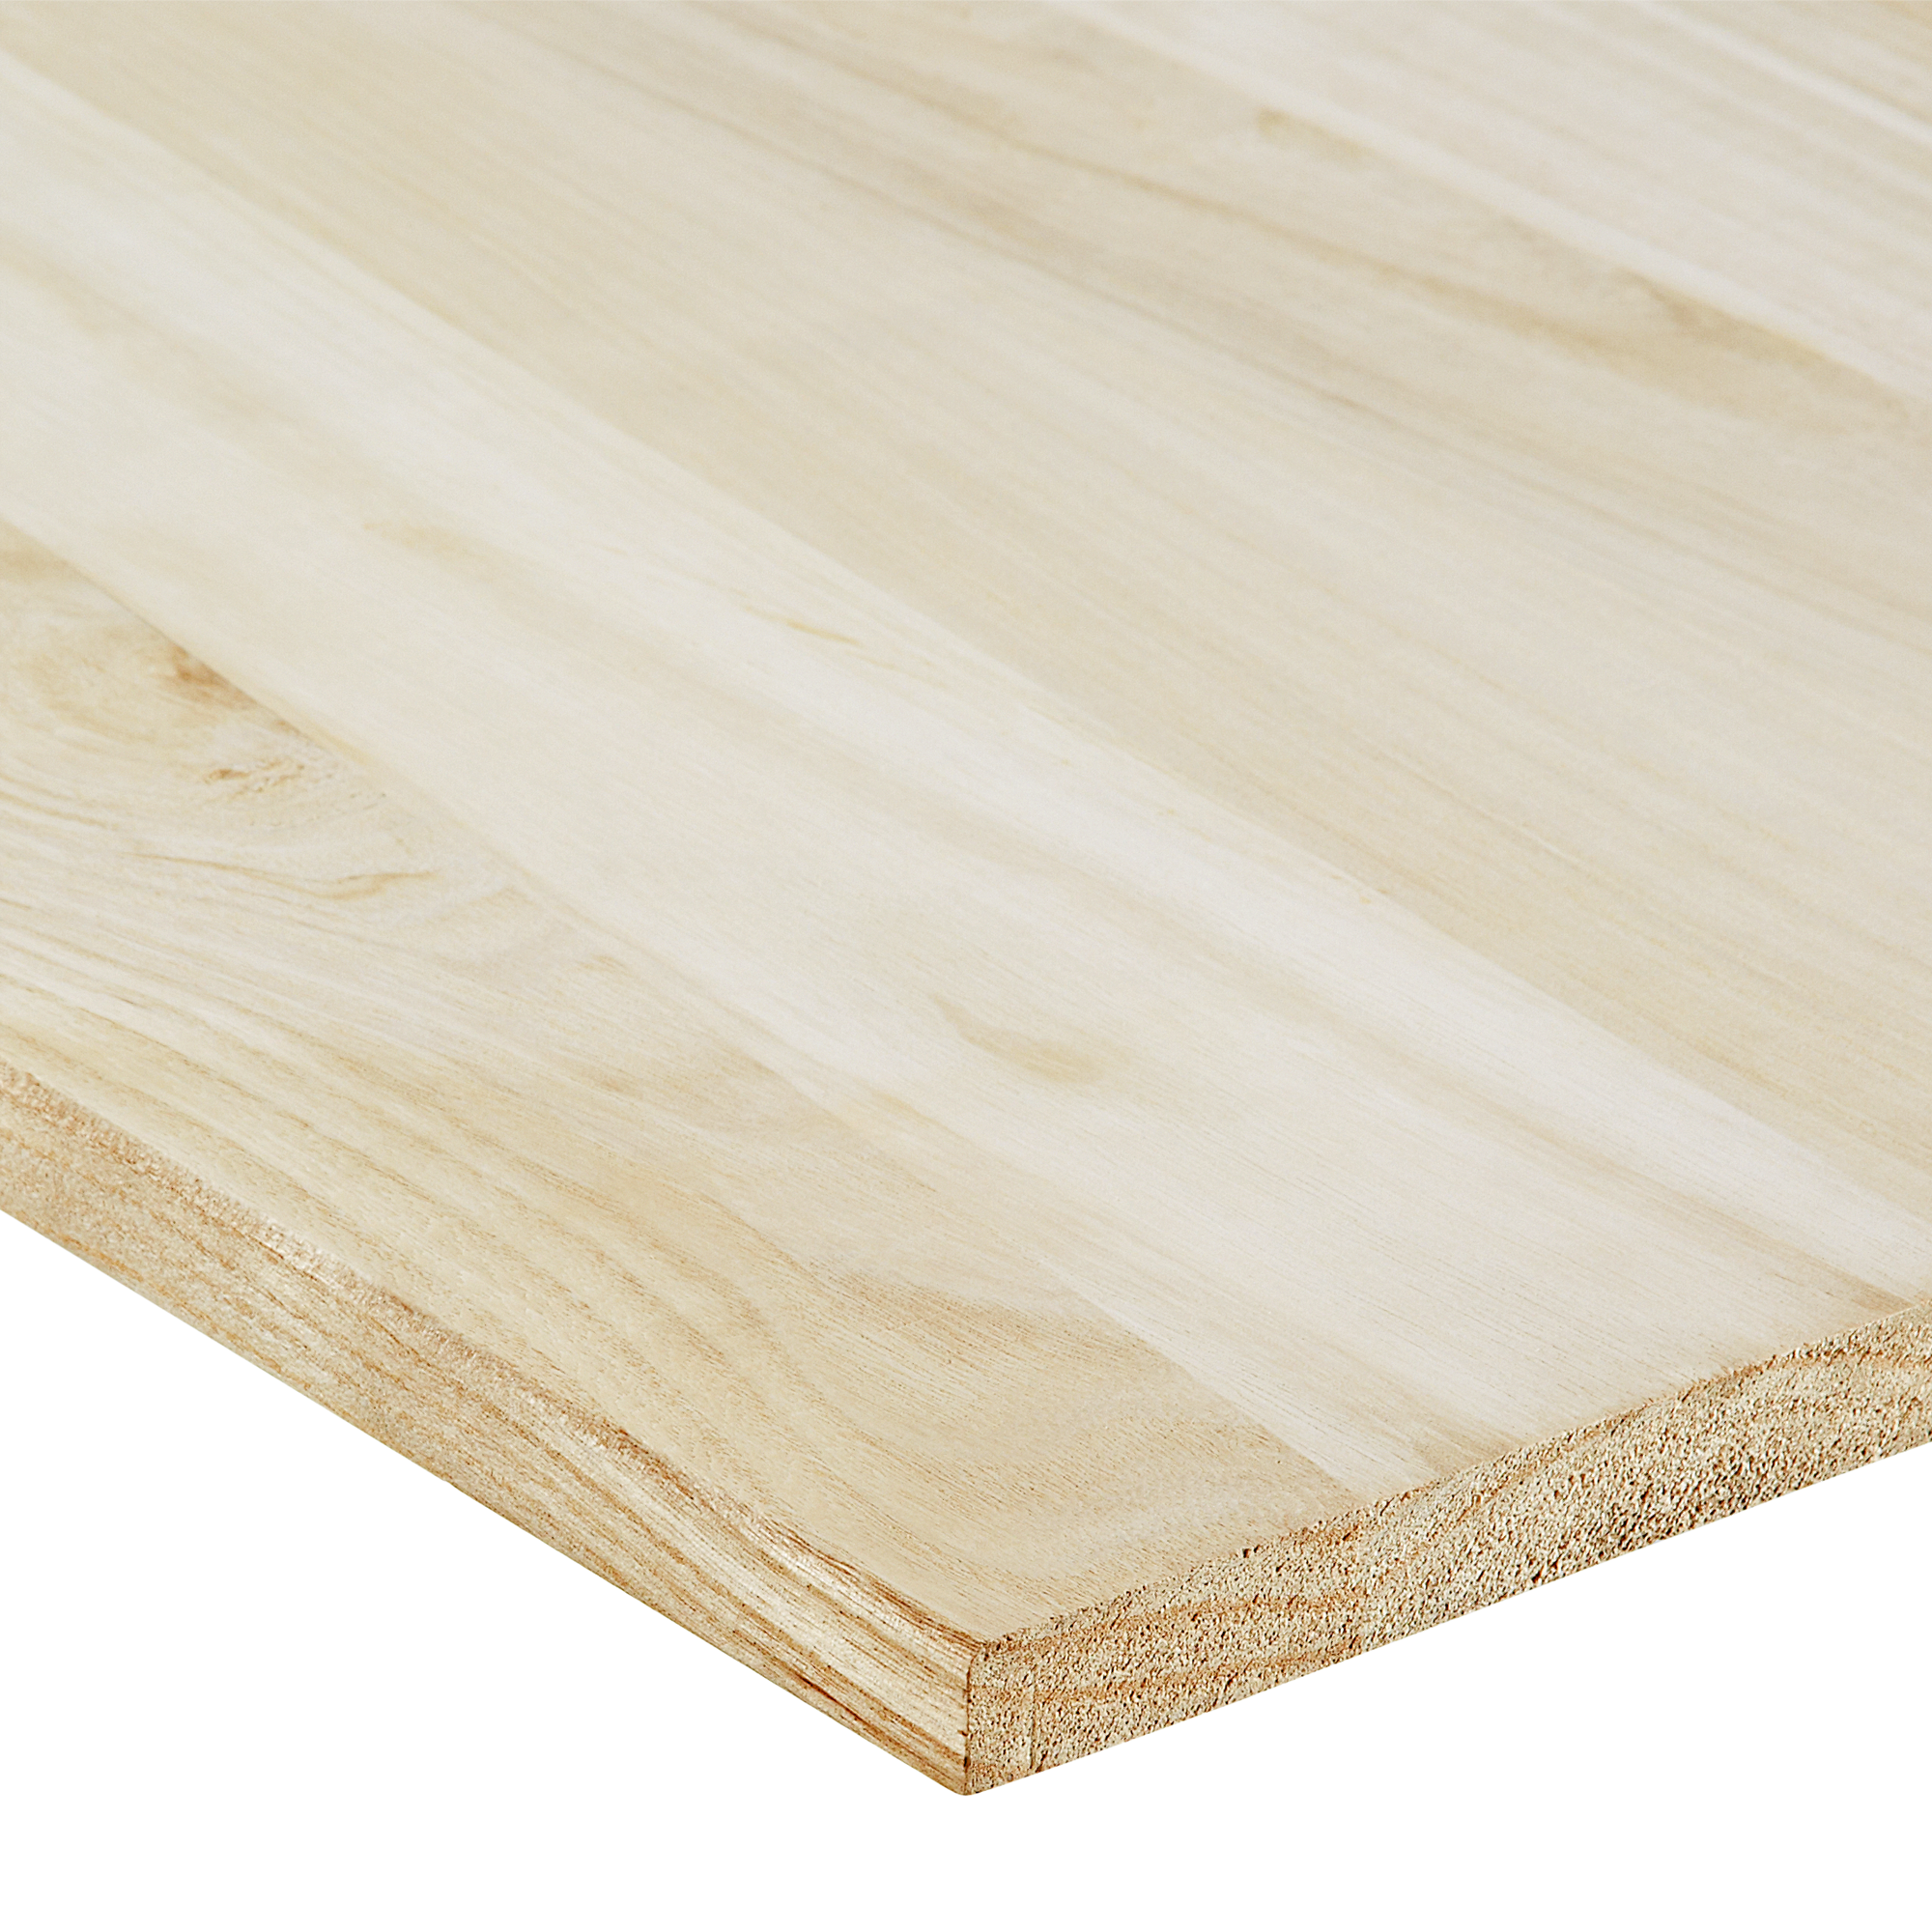 Leimholz Paulowina 18 x 400 x 800 mm + product picture